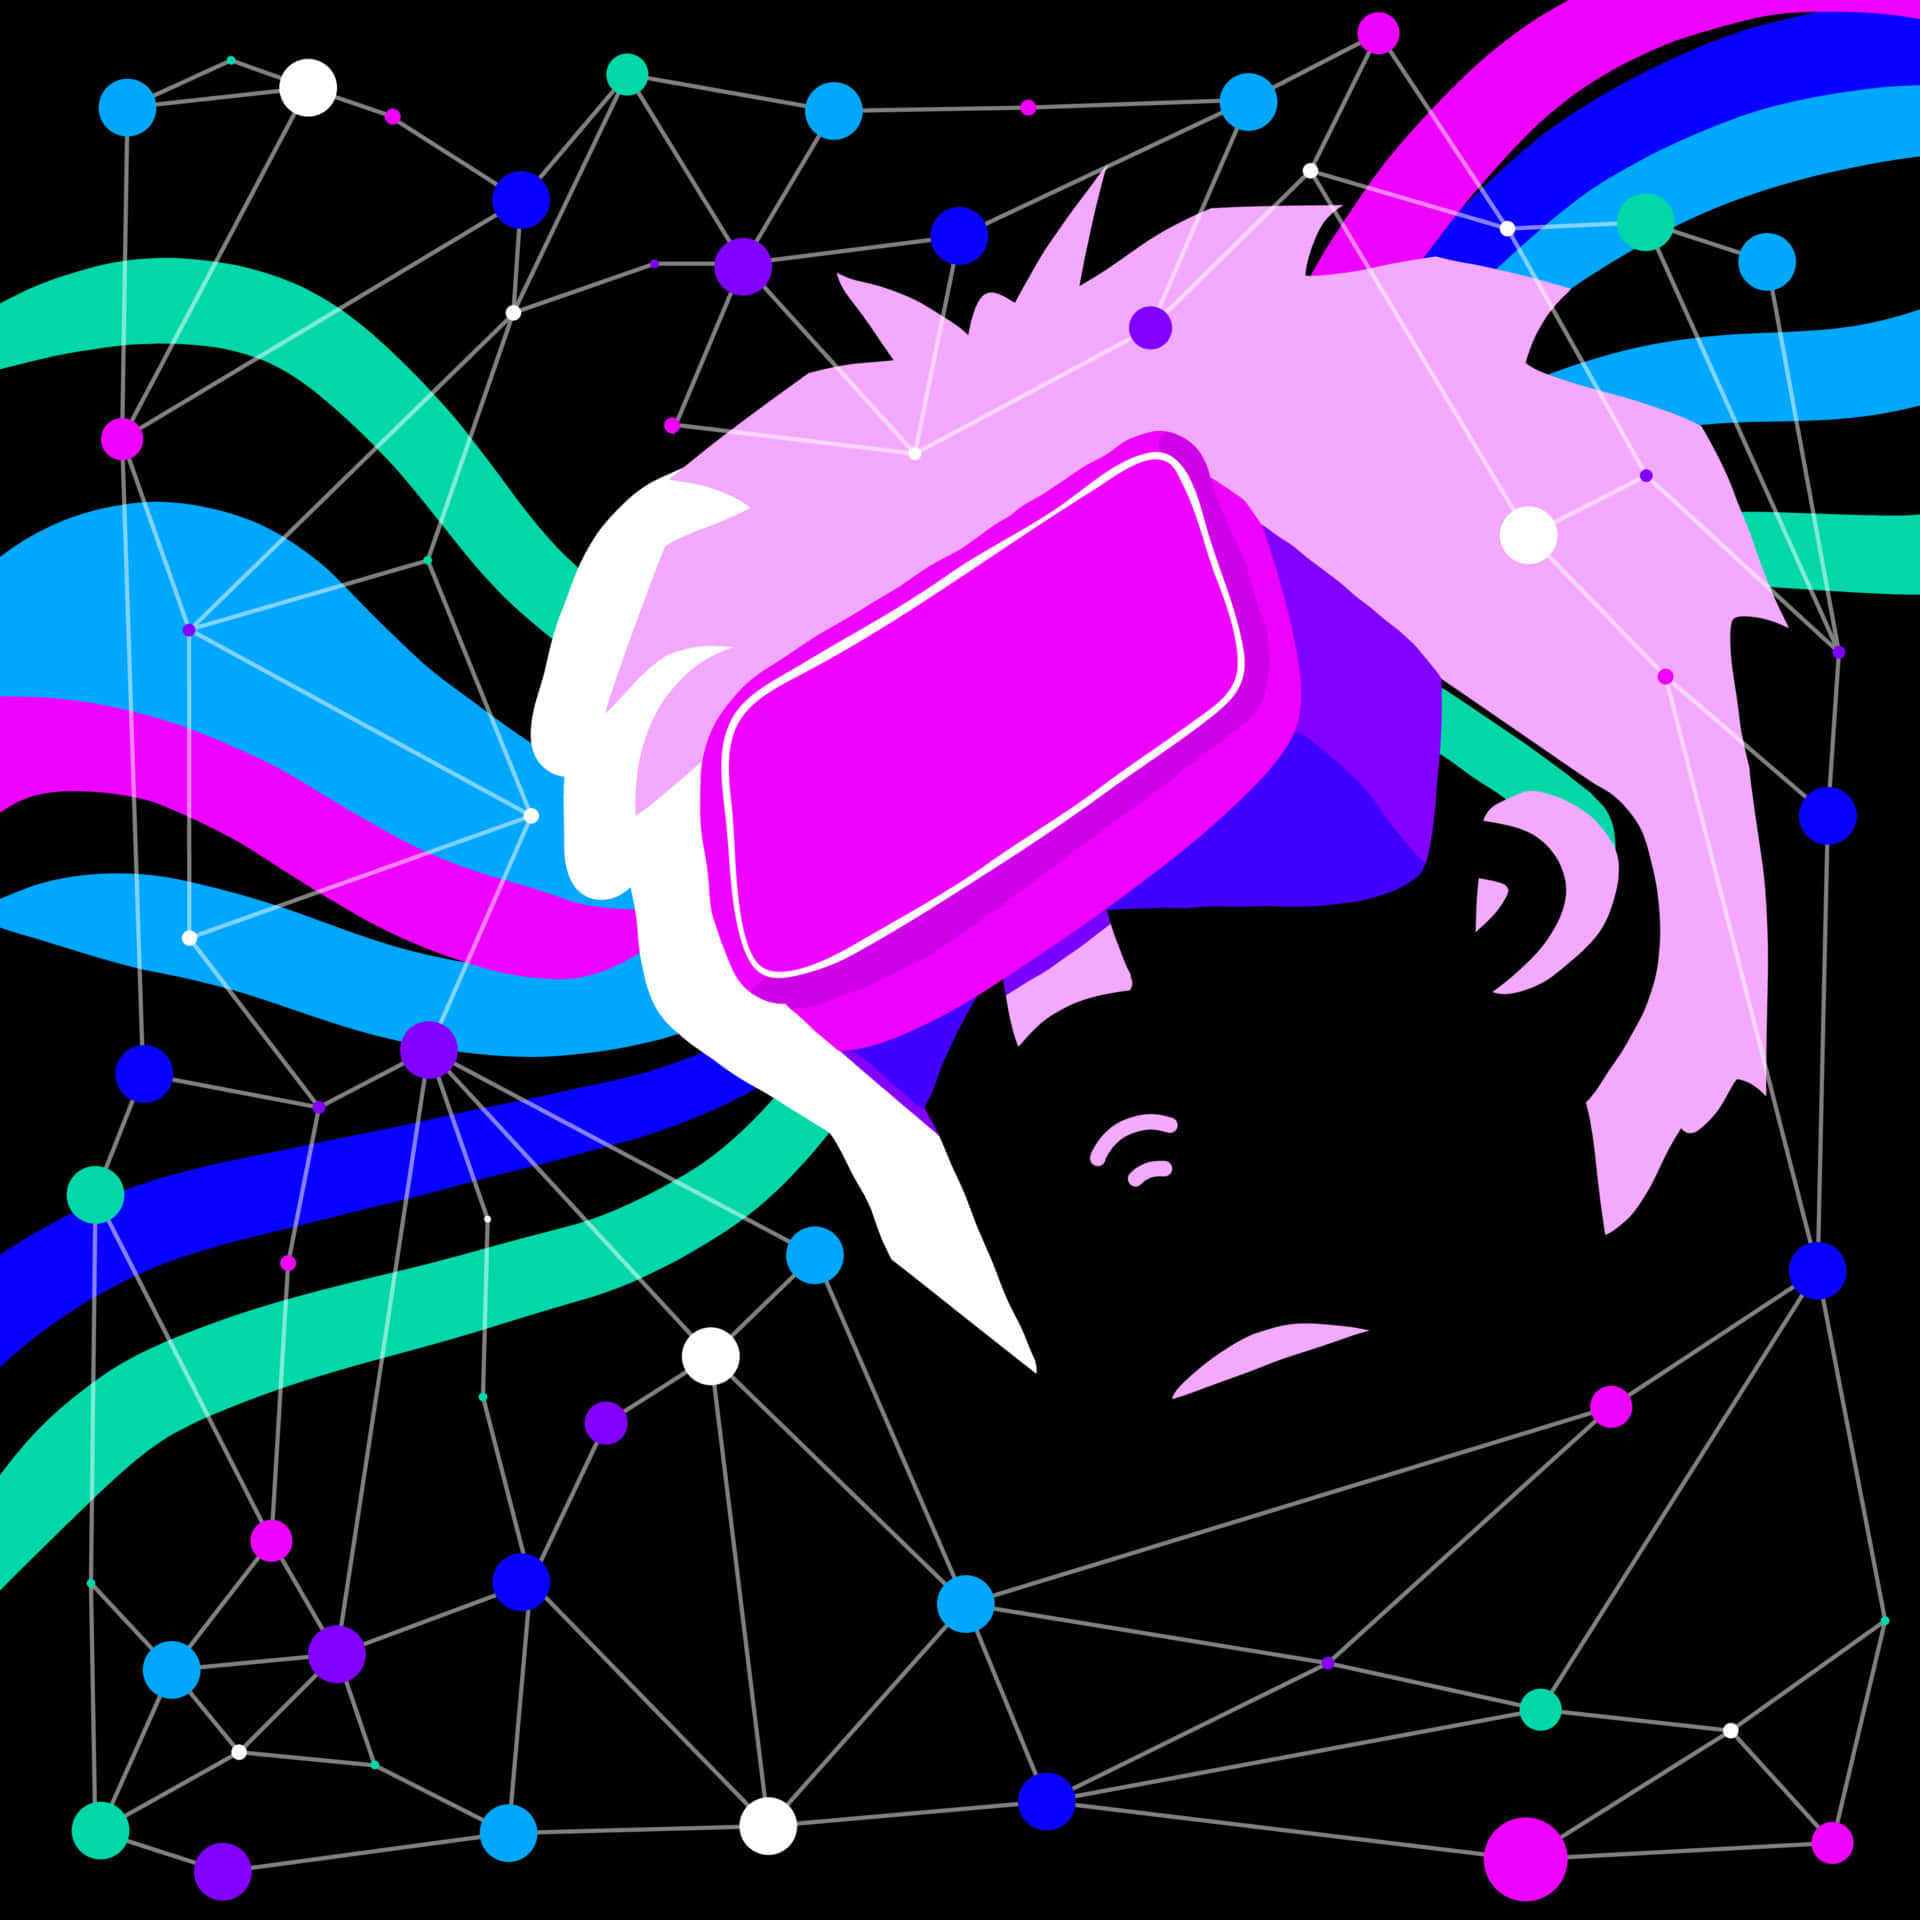 An Immersive, Neon-infused Vr Gaming Experience. Wallpaper